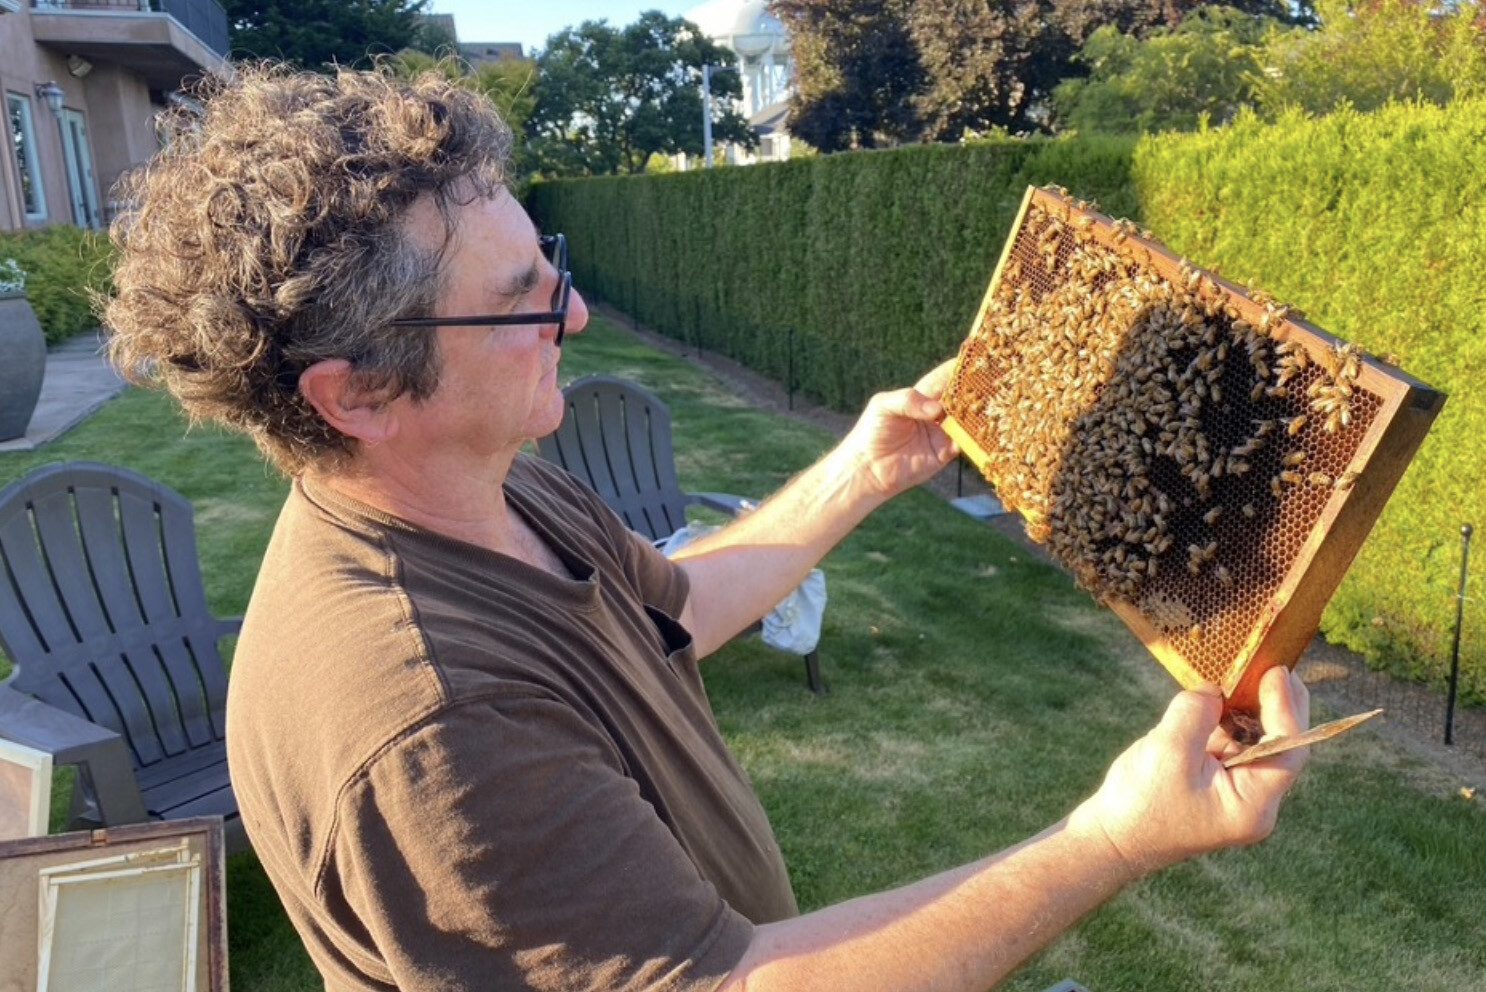 David with bees